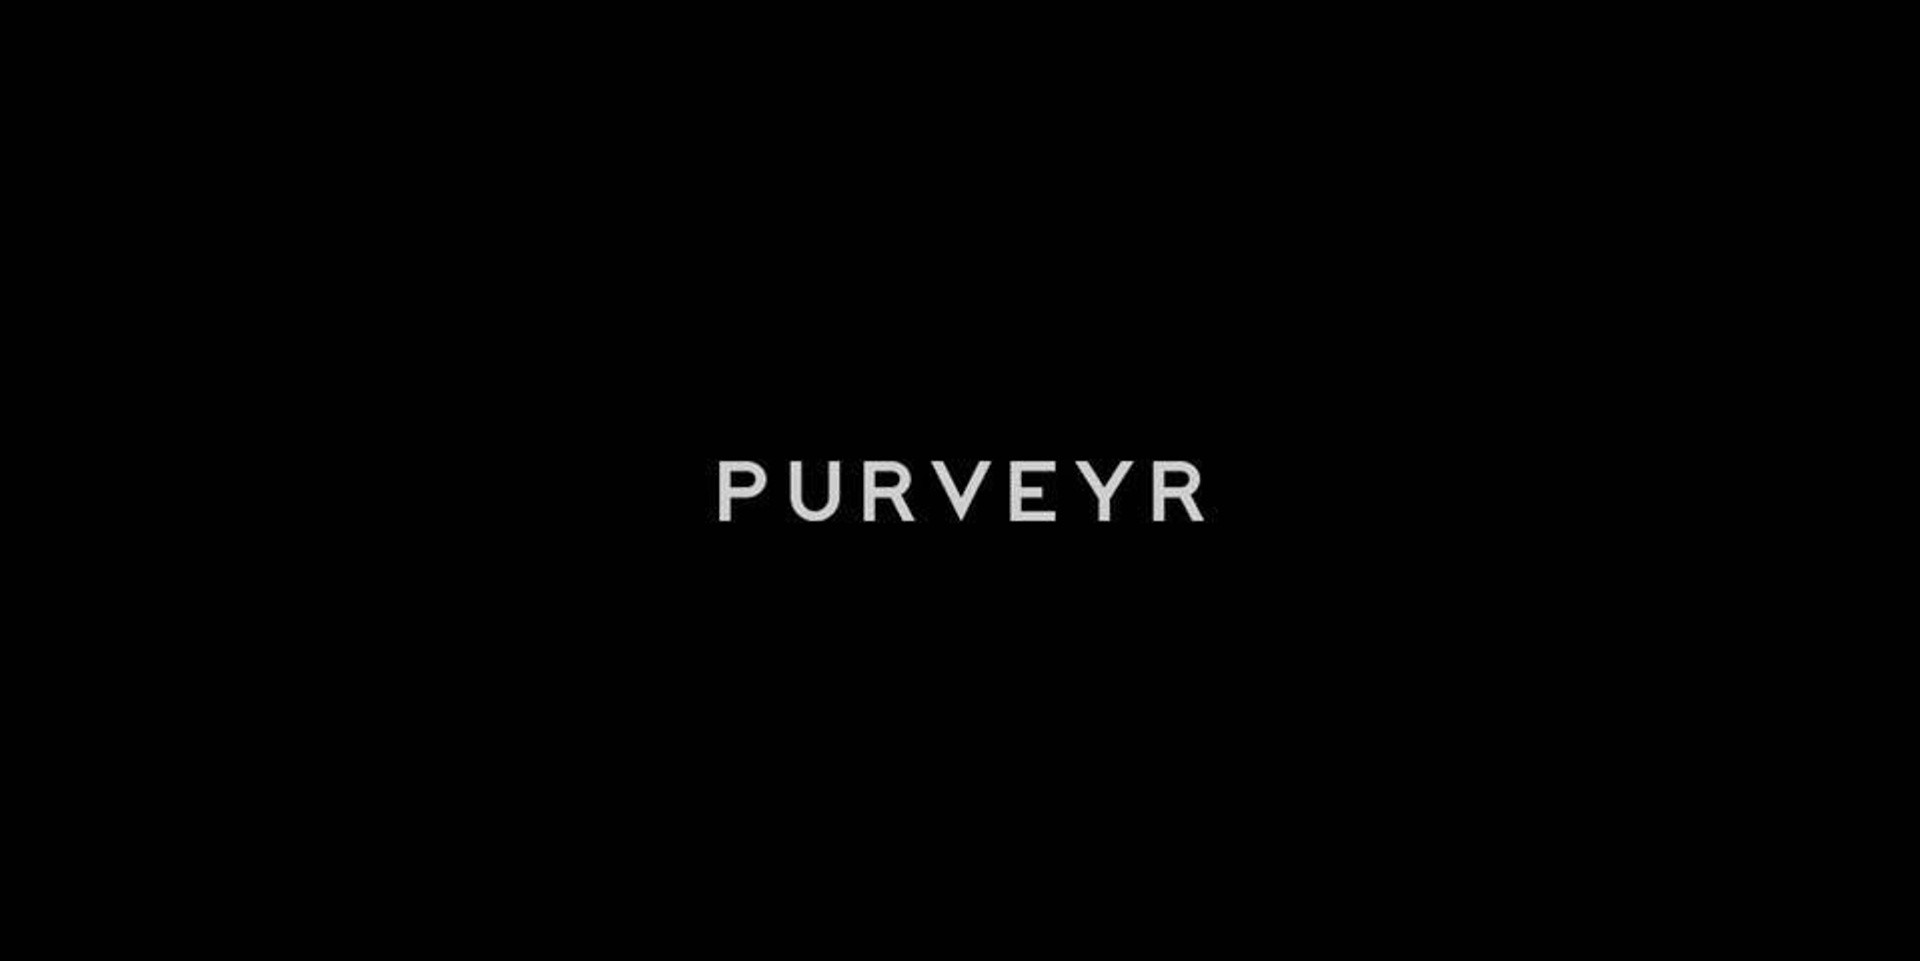 Purveyr calls on local bands and musicians to join the Pursuit Fair